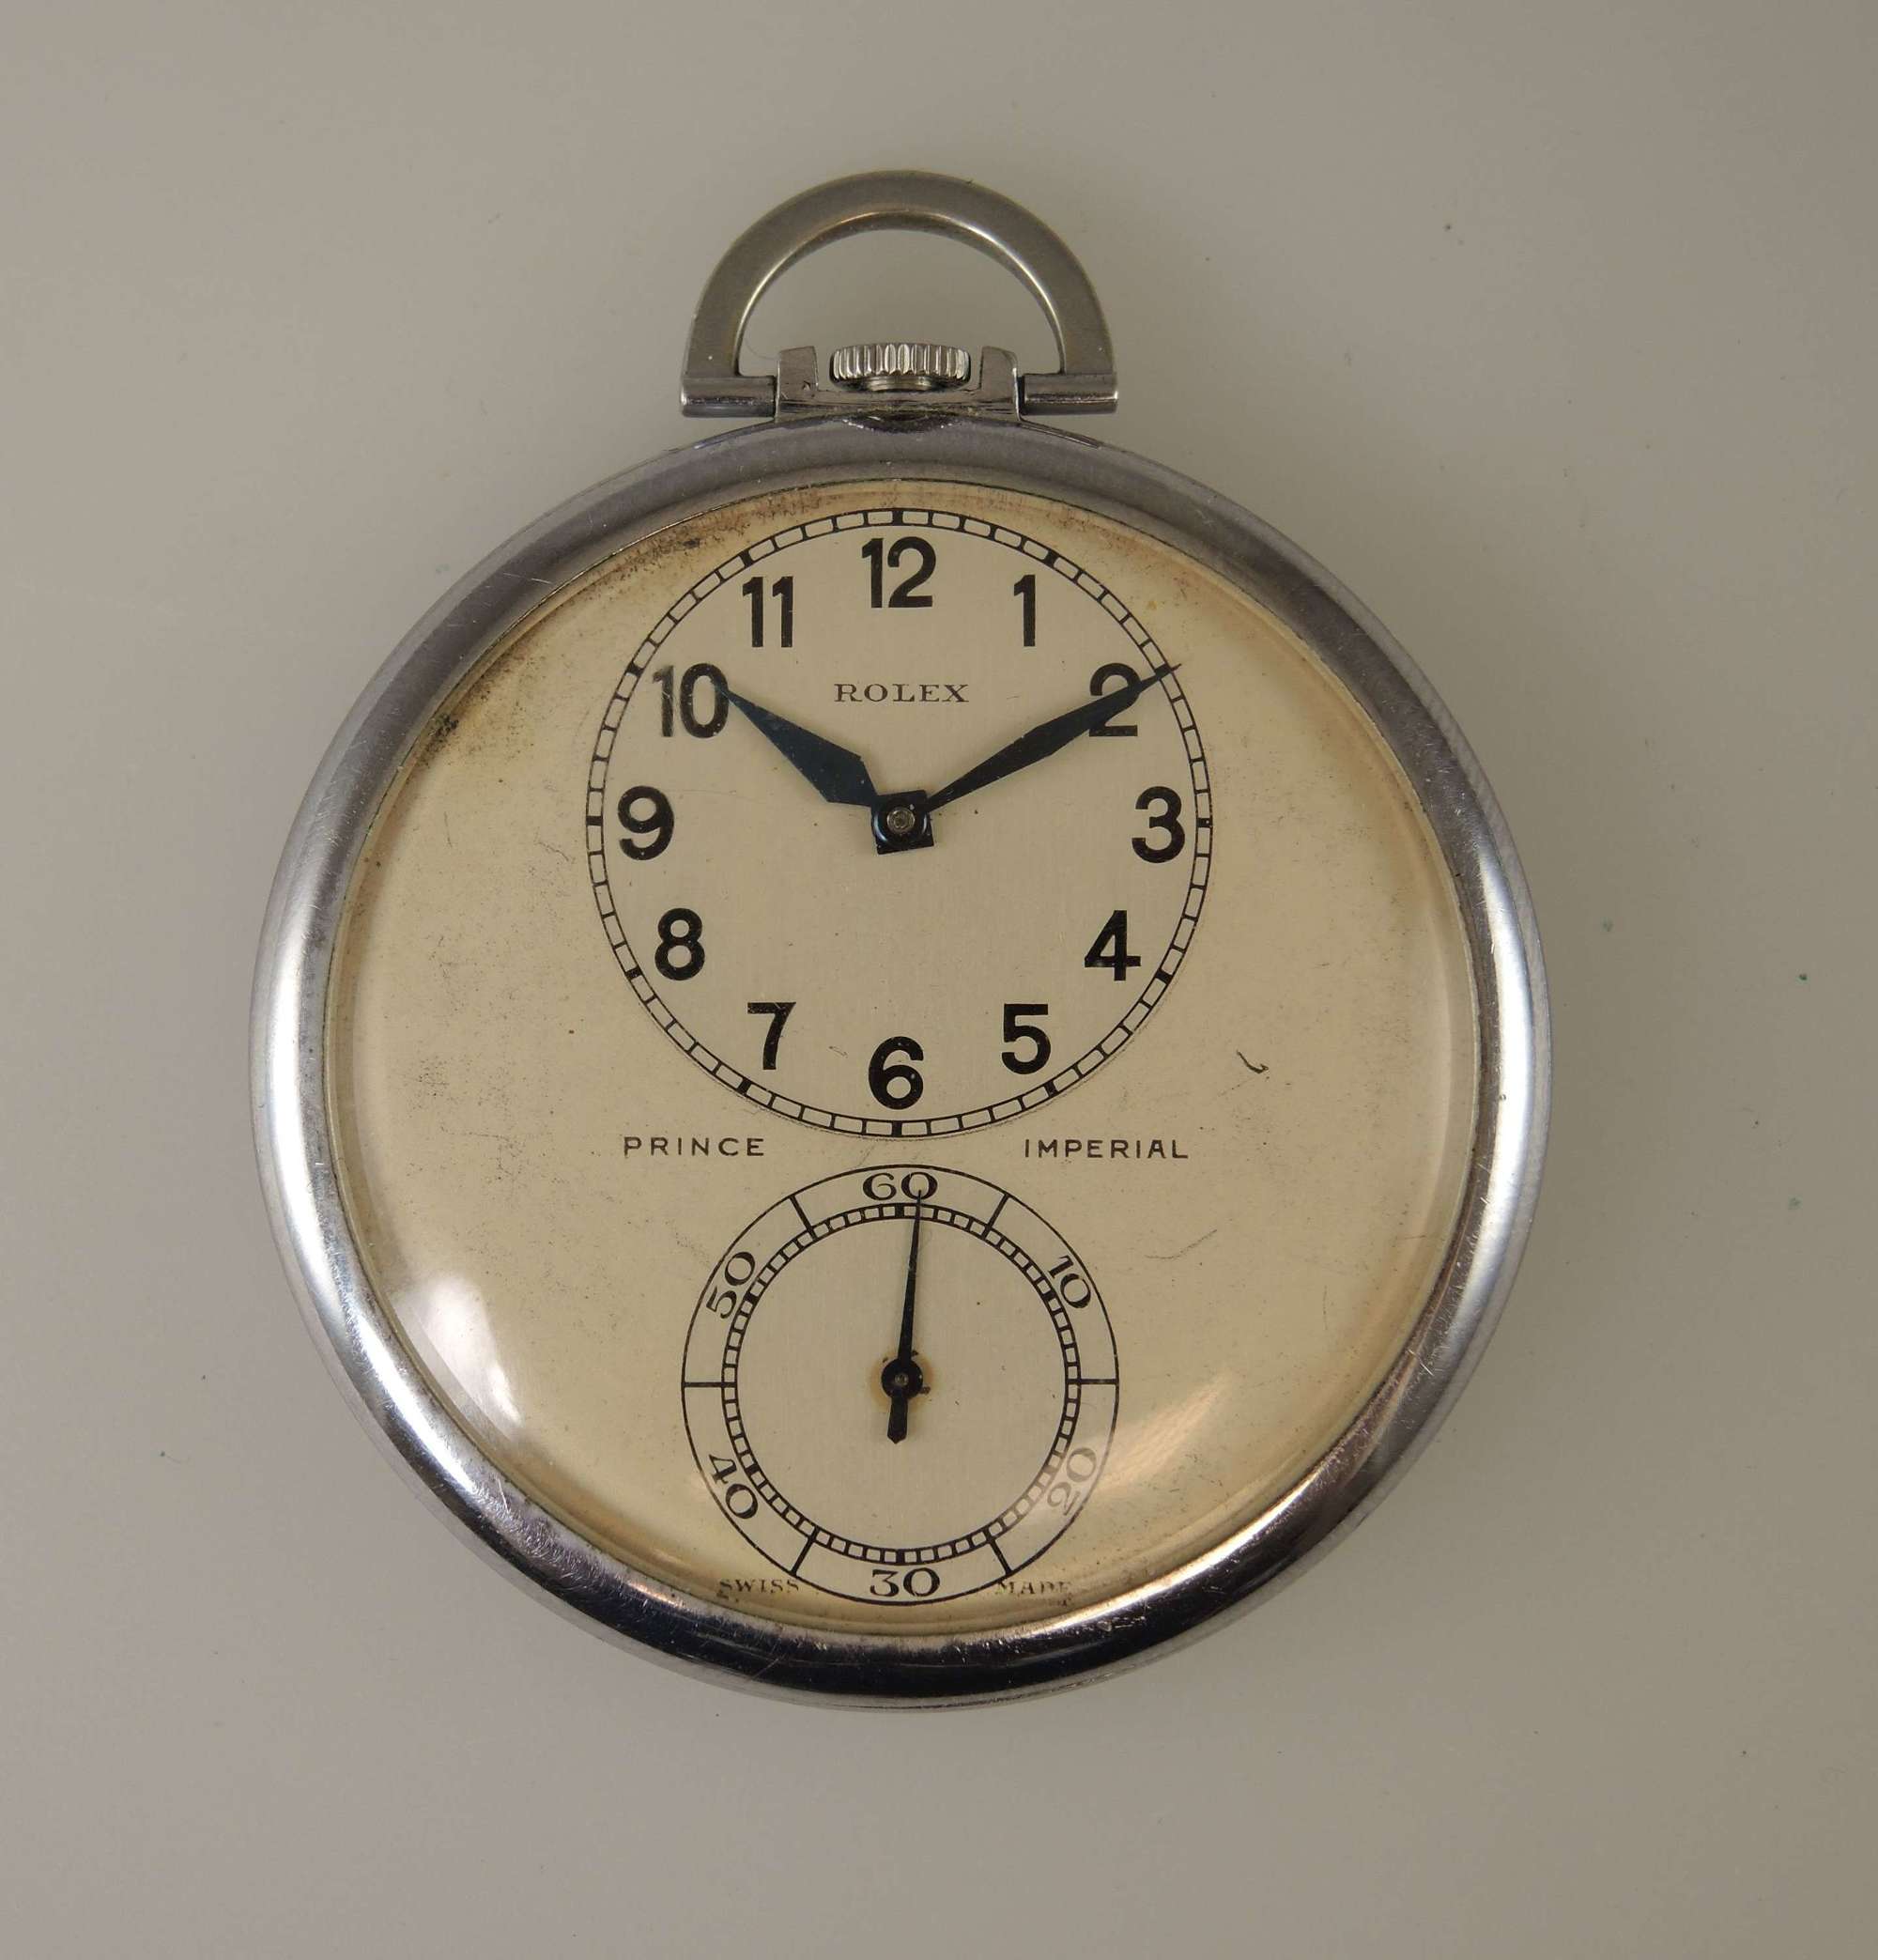 Rare ROLEX PRINCE IMPERIAL Observatory quality Pocket watch c1930